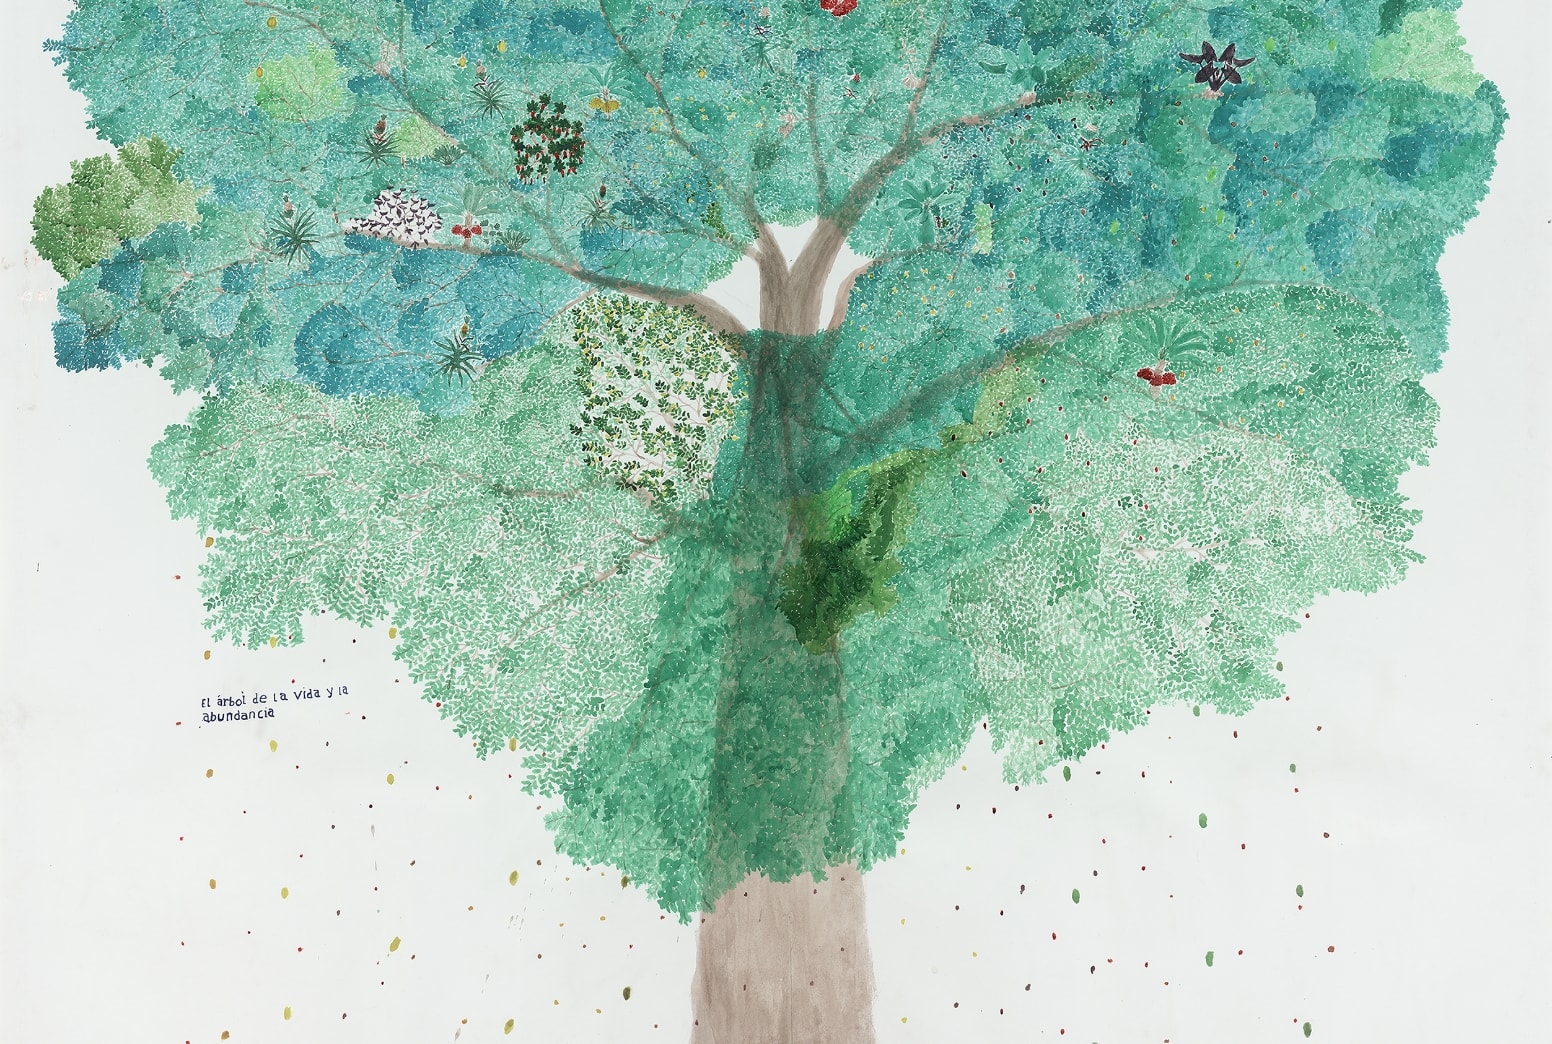 Drawing of a large tree with green leaves and animals on the ground below it